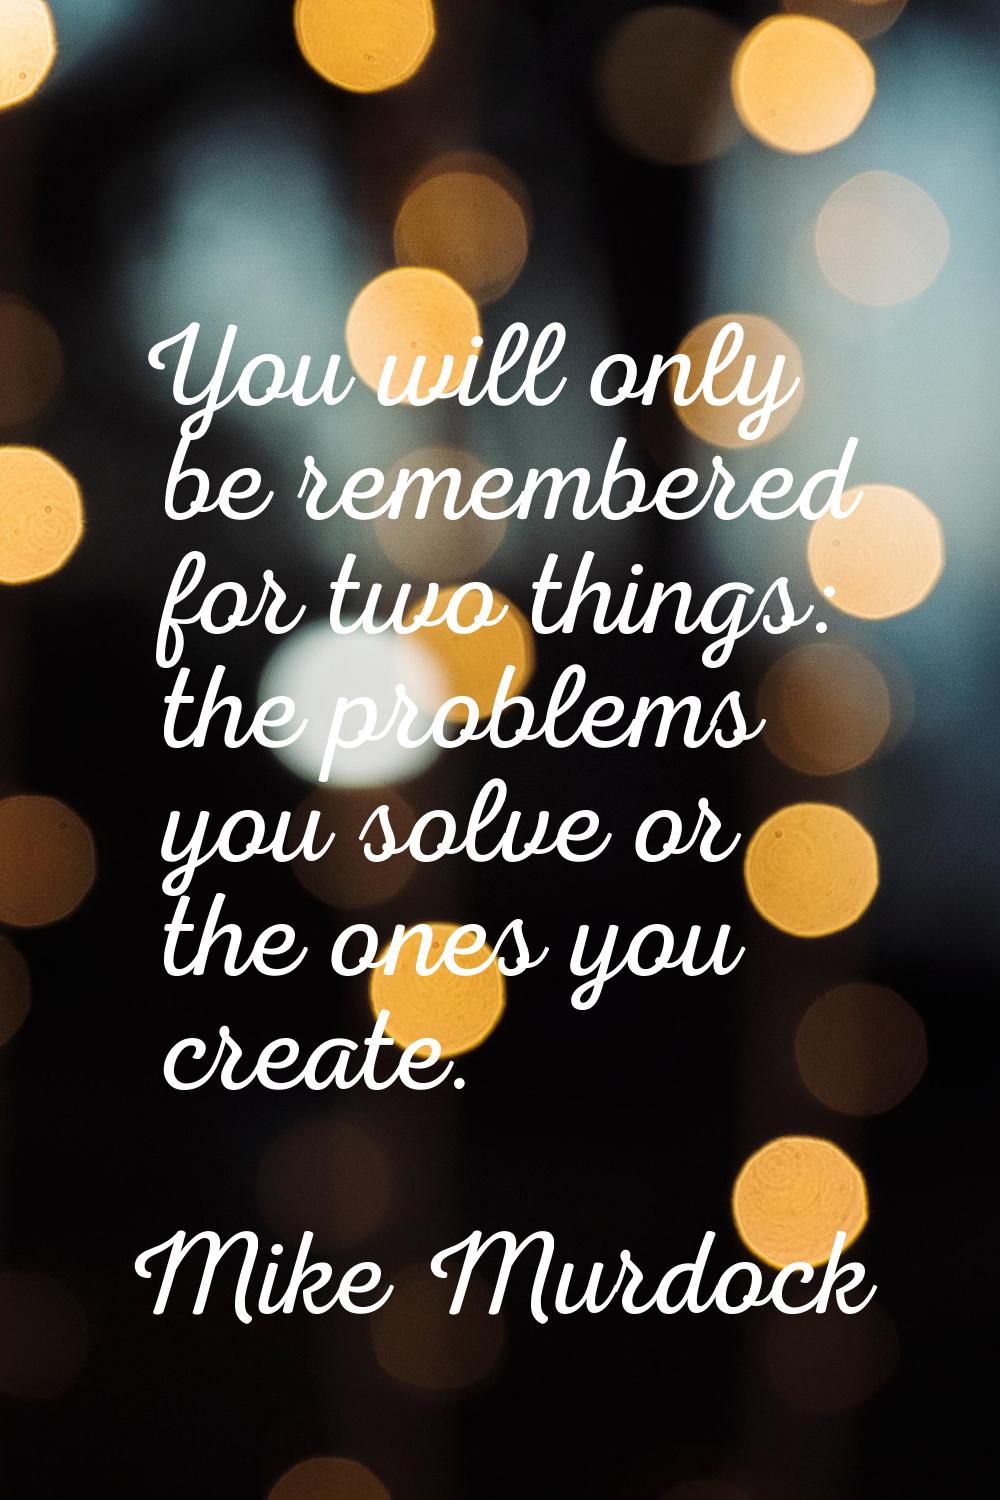 You will only be remembered for two things: the problems you solve or the ones you create.